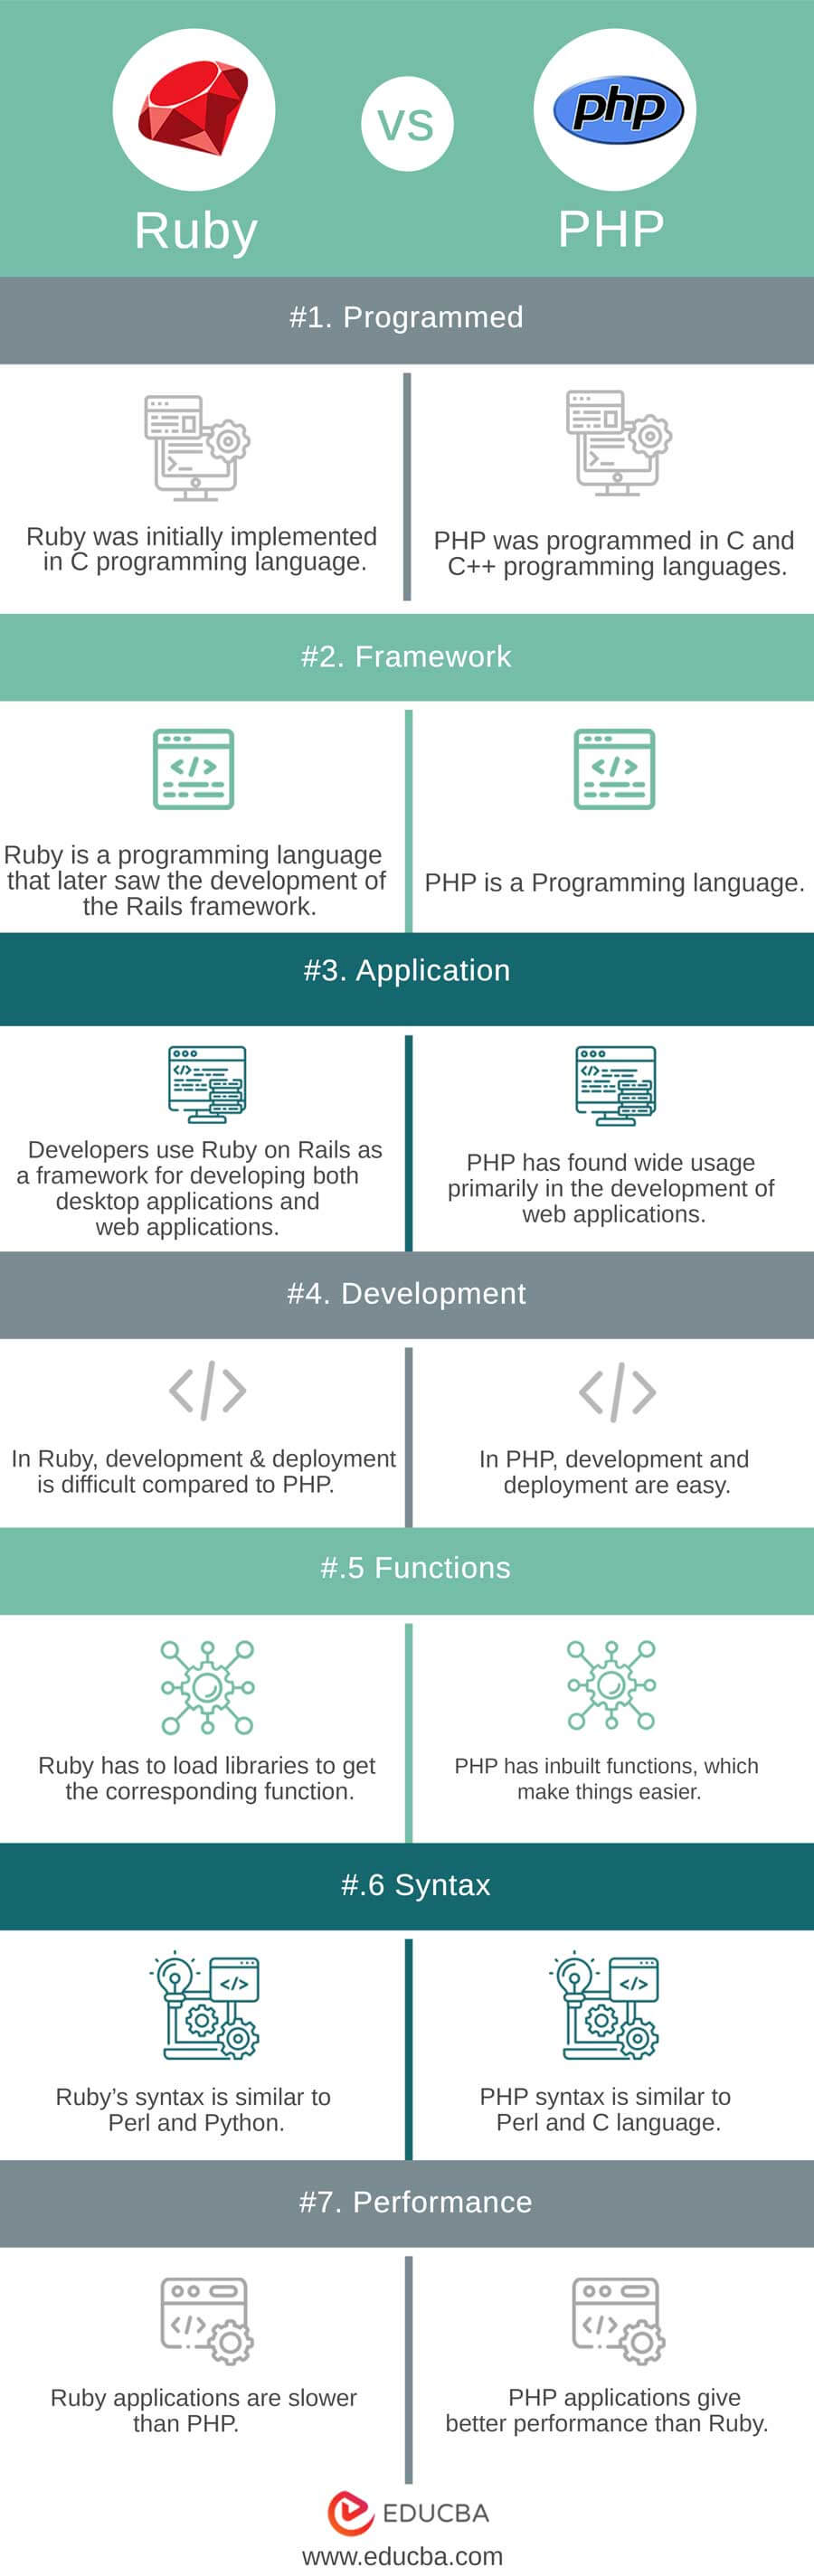 Ruby vs PHP infographic